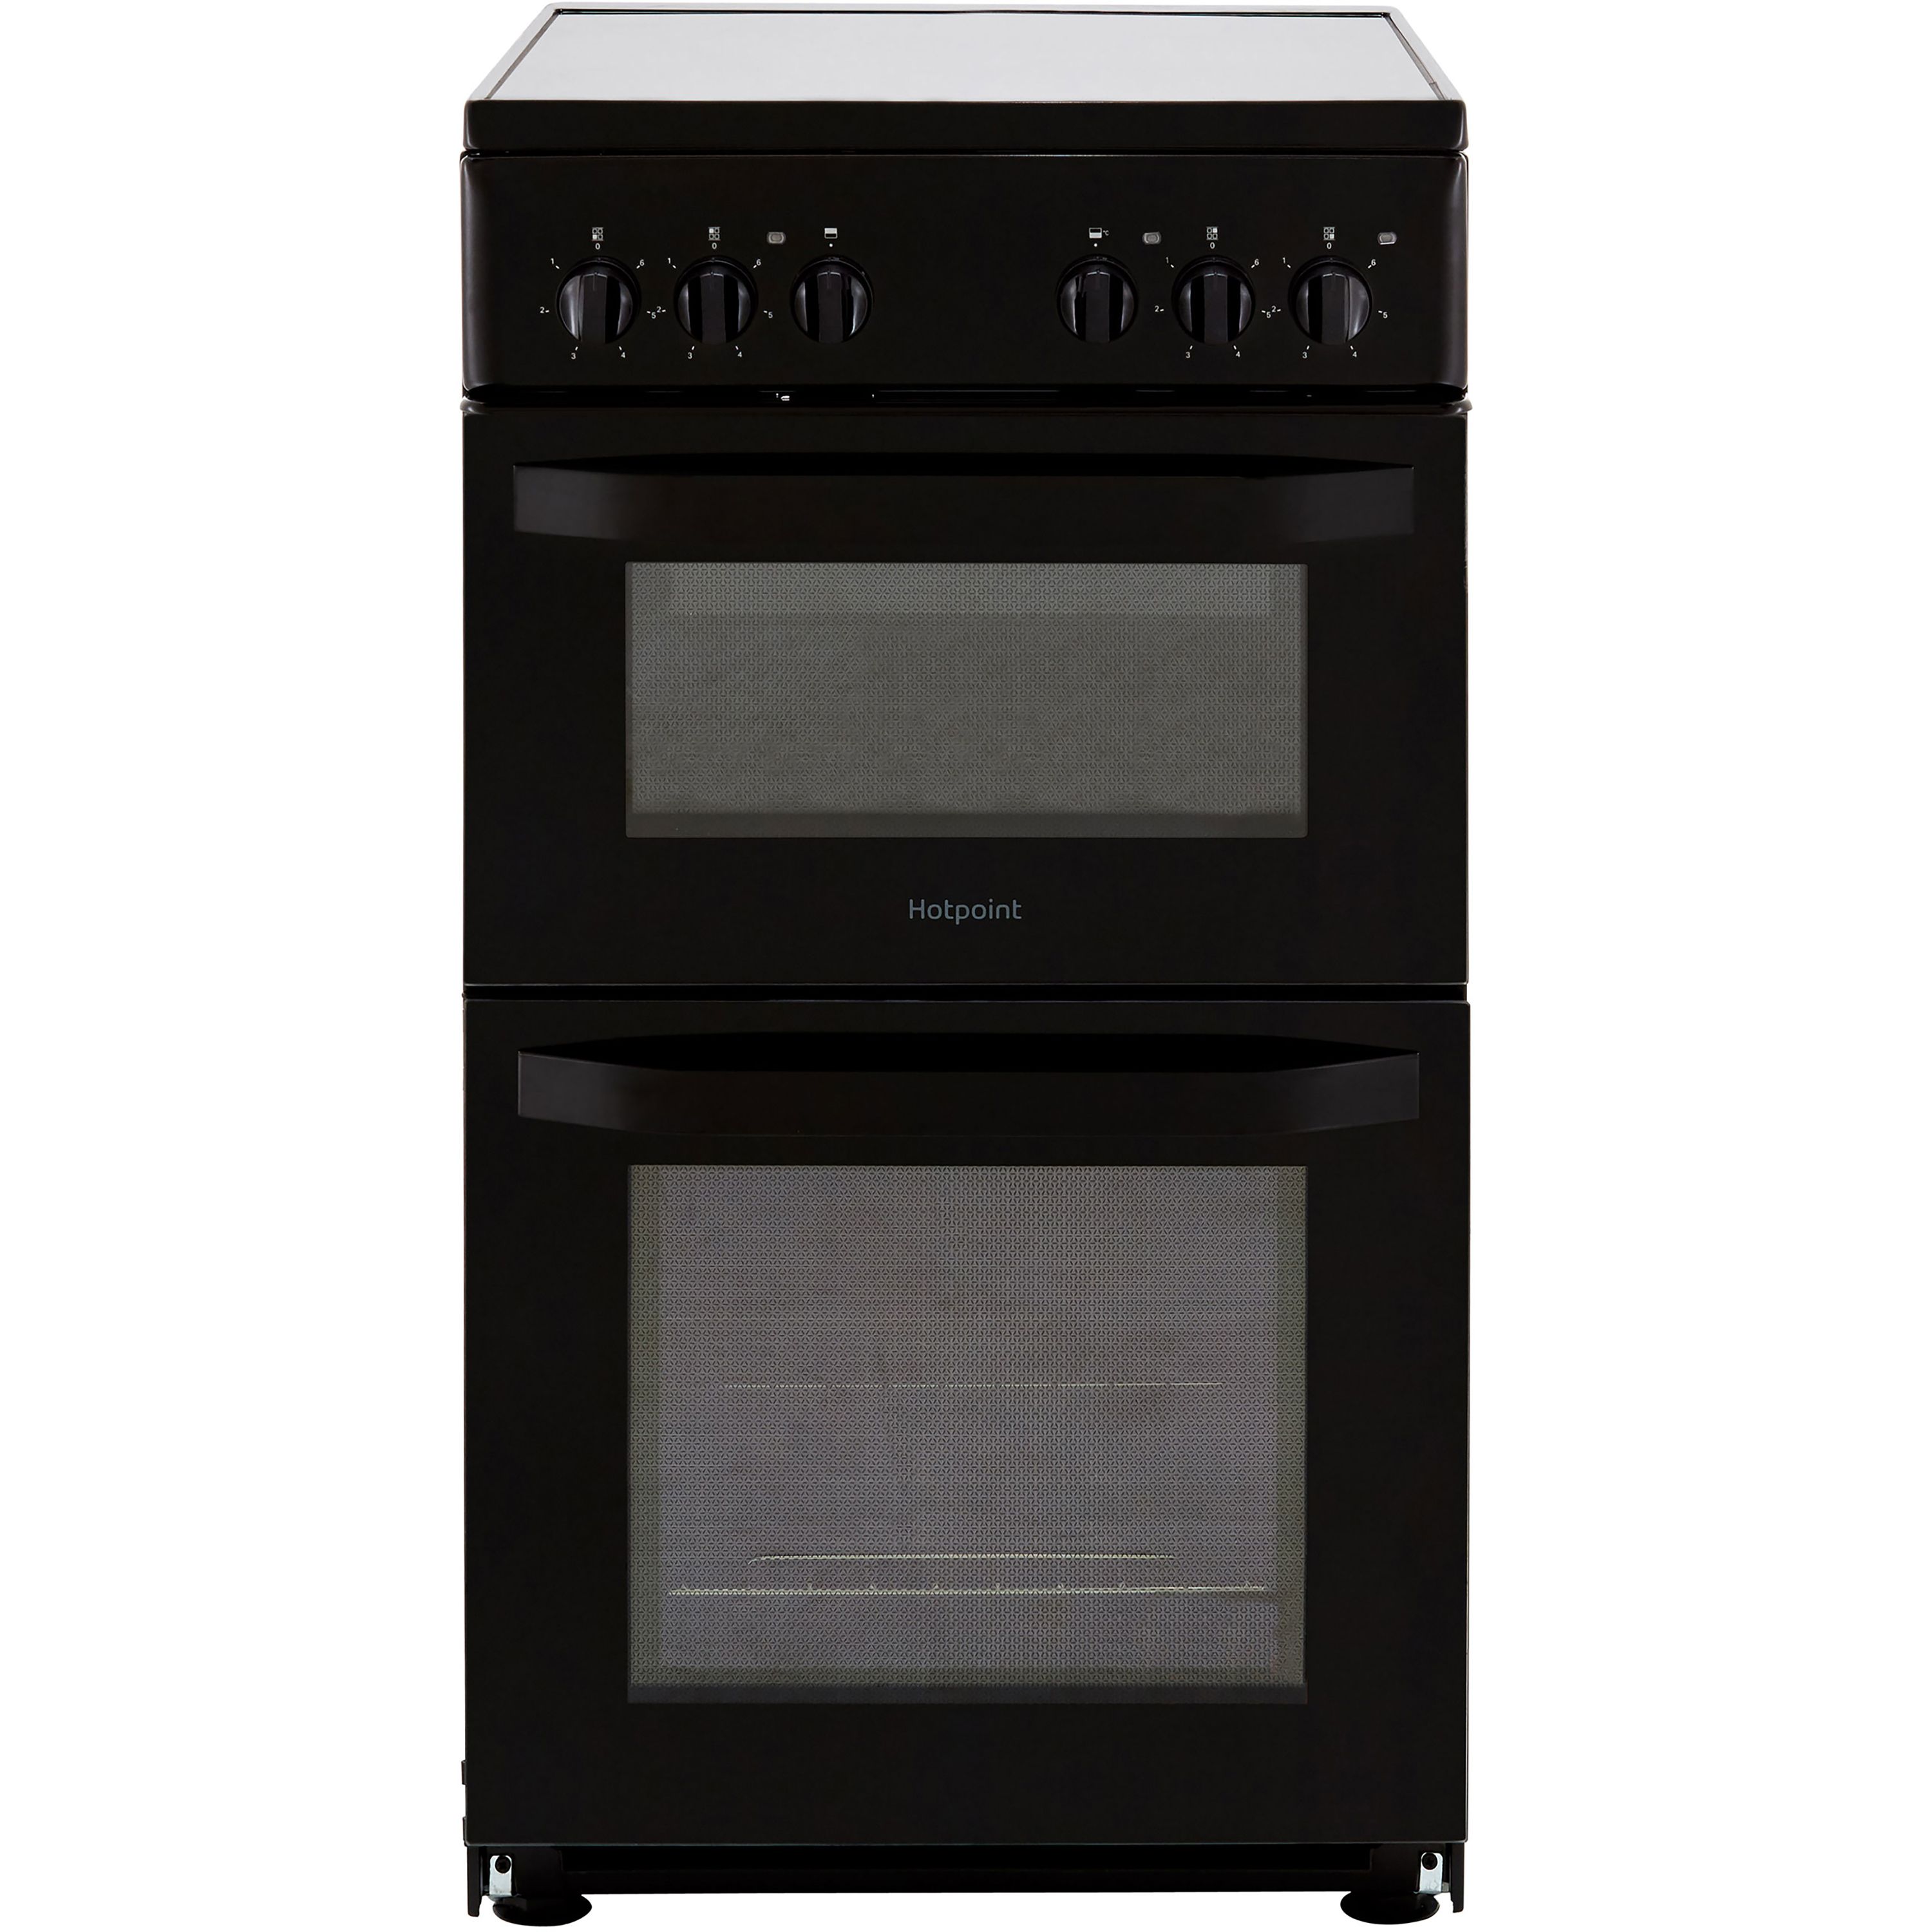 Hotpoint HD5V92KCB_BK 50cm Double Electric Cooker with Ceramic Hob - Black